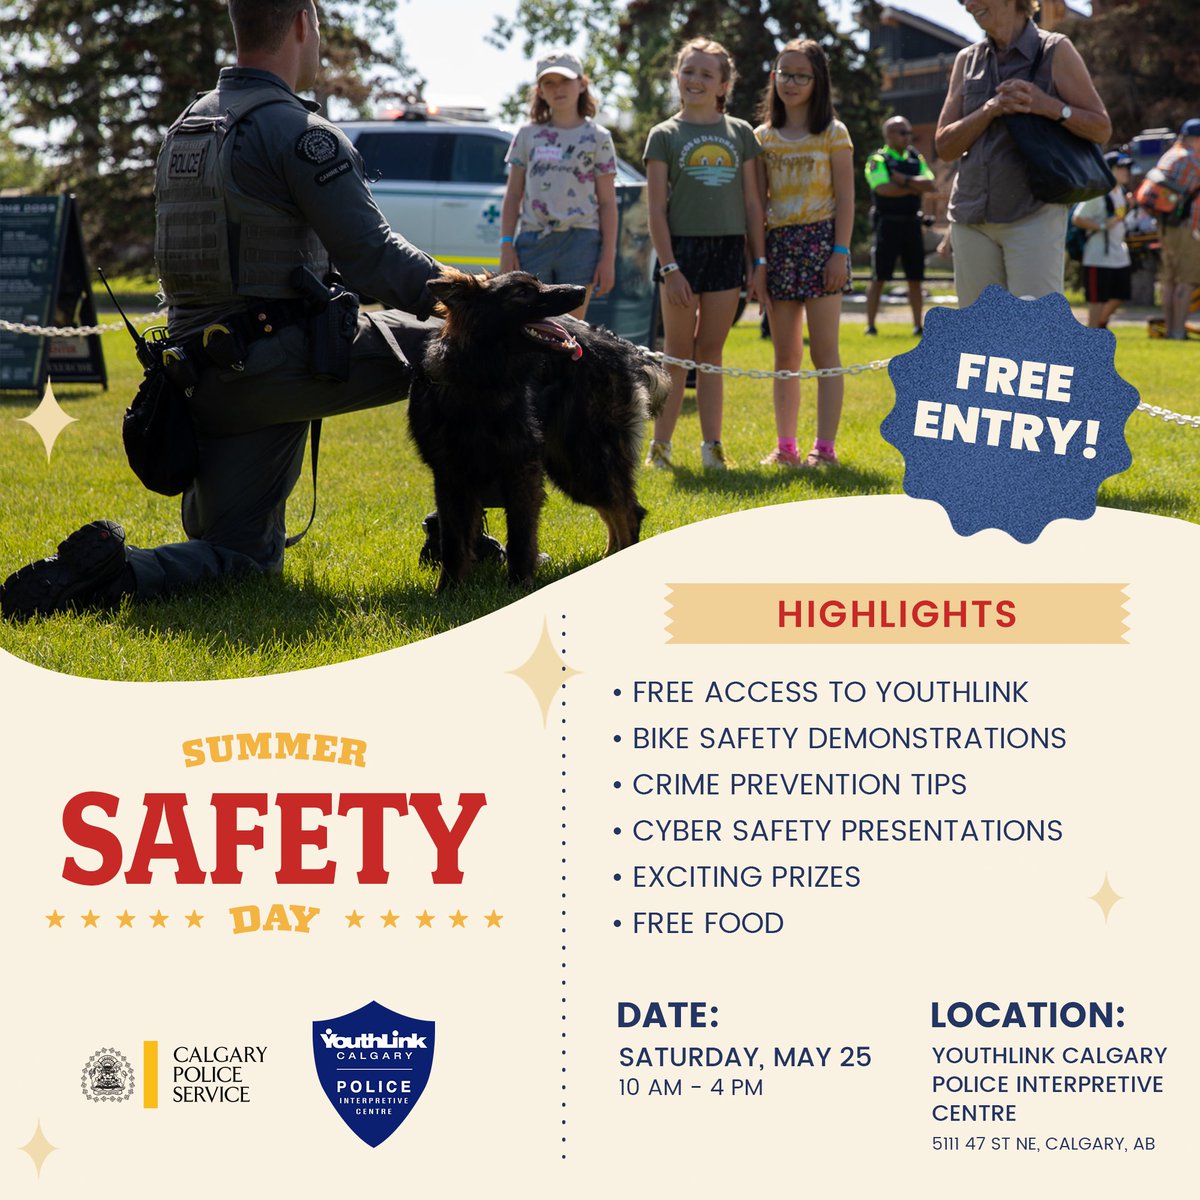 We are so excited to introduce YouthLink Calgary's Summer Safety Day! Join us and @CalgaryPolice for this free event on May 25th to learn all about how to stay safe in the Summer! For more information on the event and to register, visit bit.ly/3WEqxXA